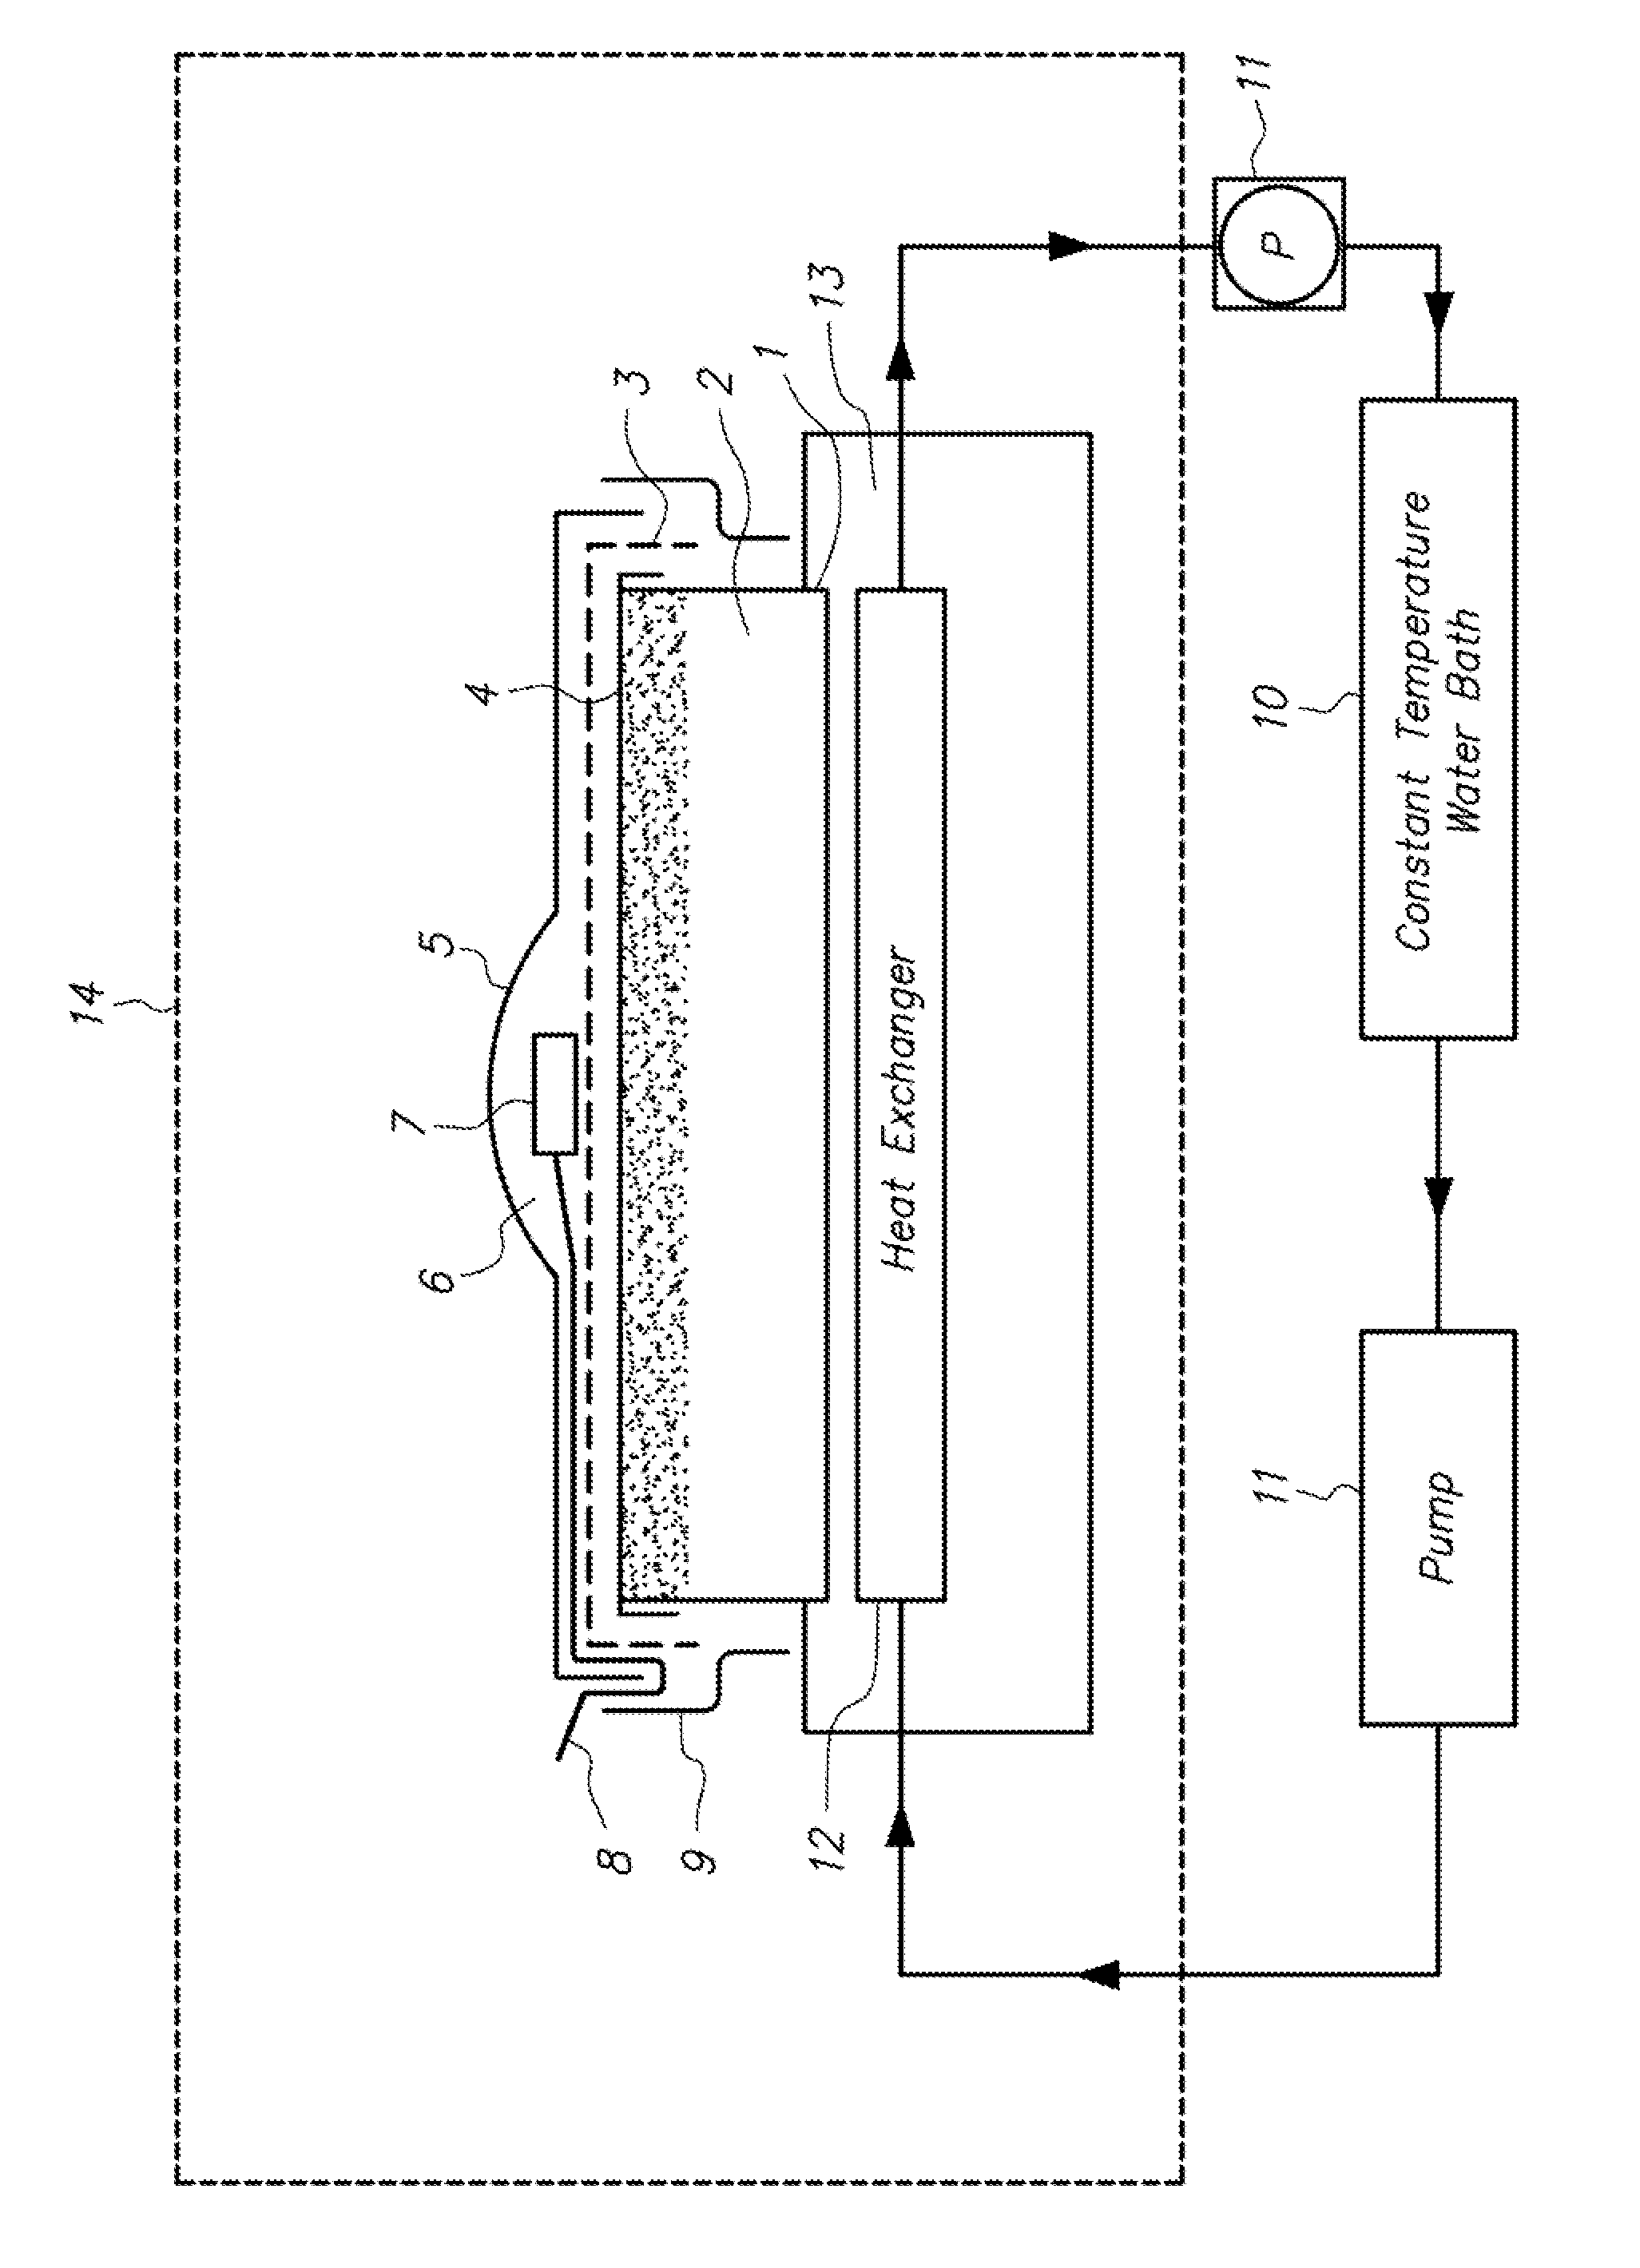 Apparatus for simulatively measuring environment of wound dressing on skin and measuring method therefor